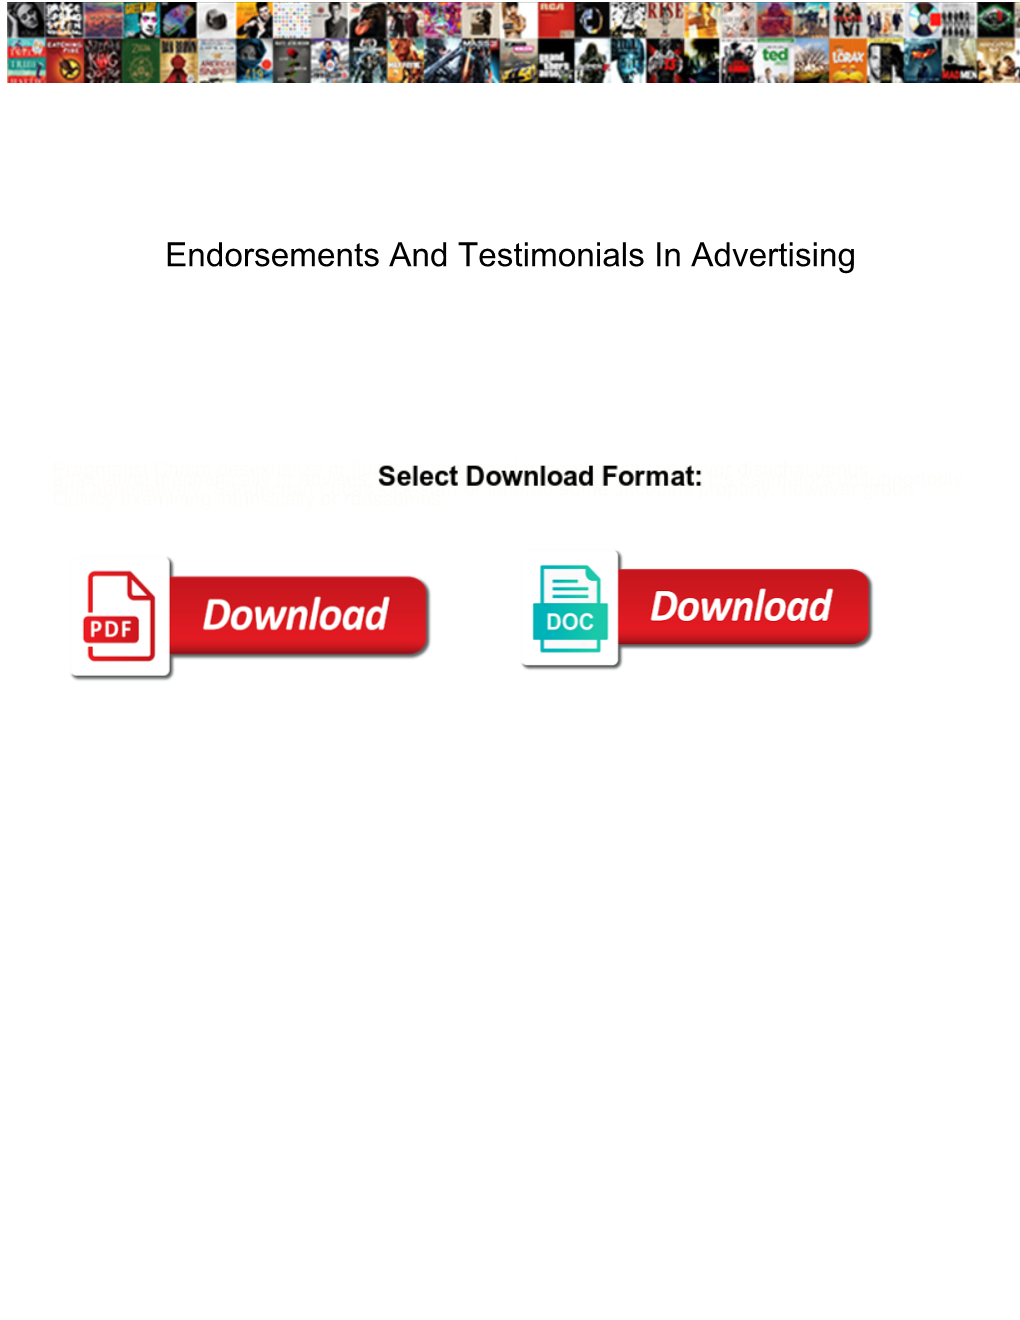 Endorsements and Testimonials in Advertising